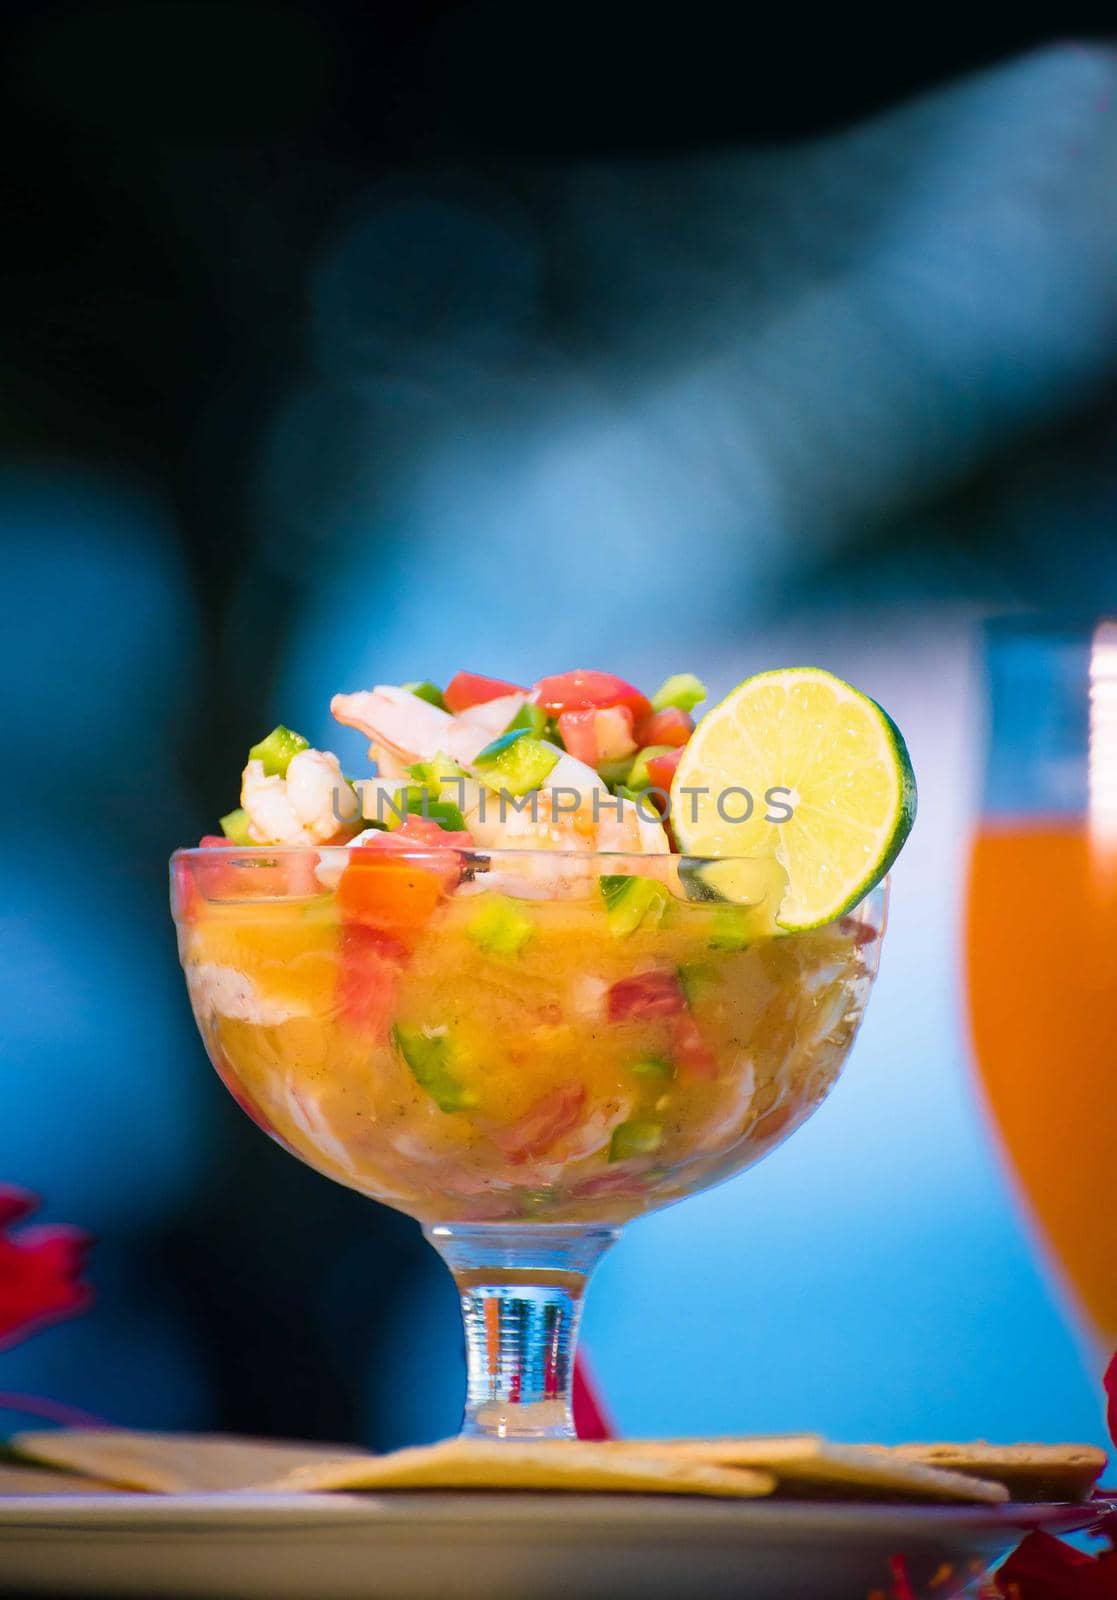 Nicaraguan food, shrimp ceviche with fruit cocktail drink, Nicaraguan palate by isaiphoto